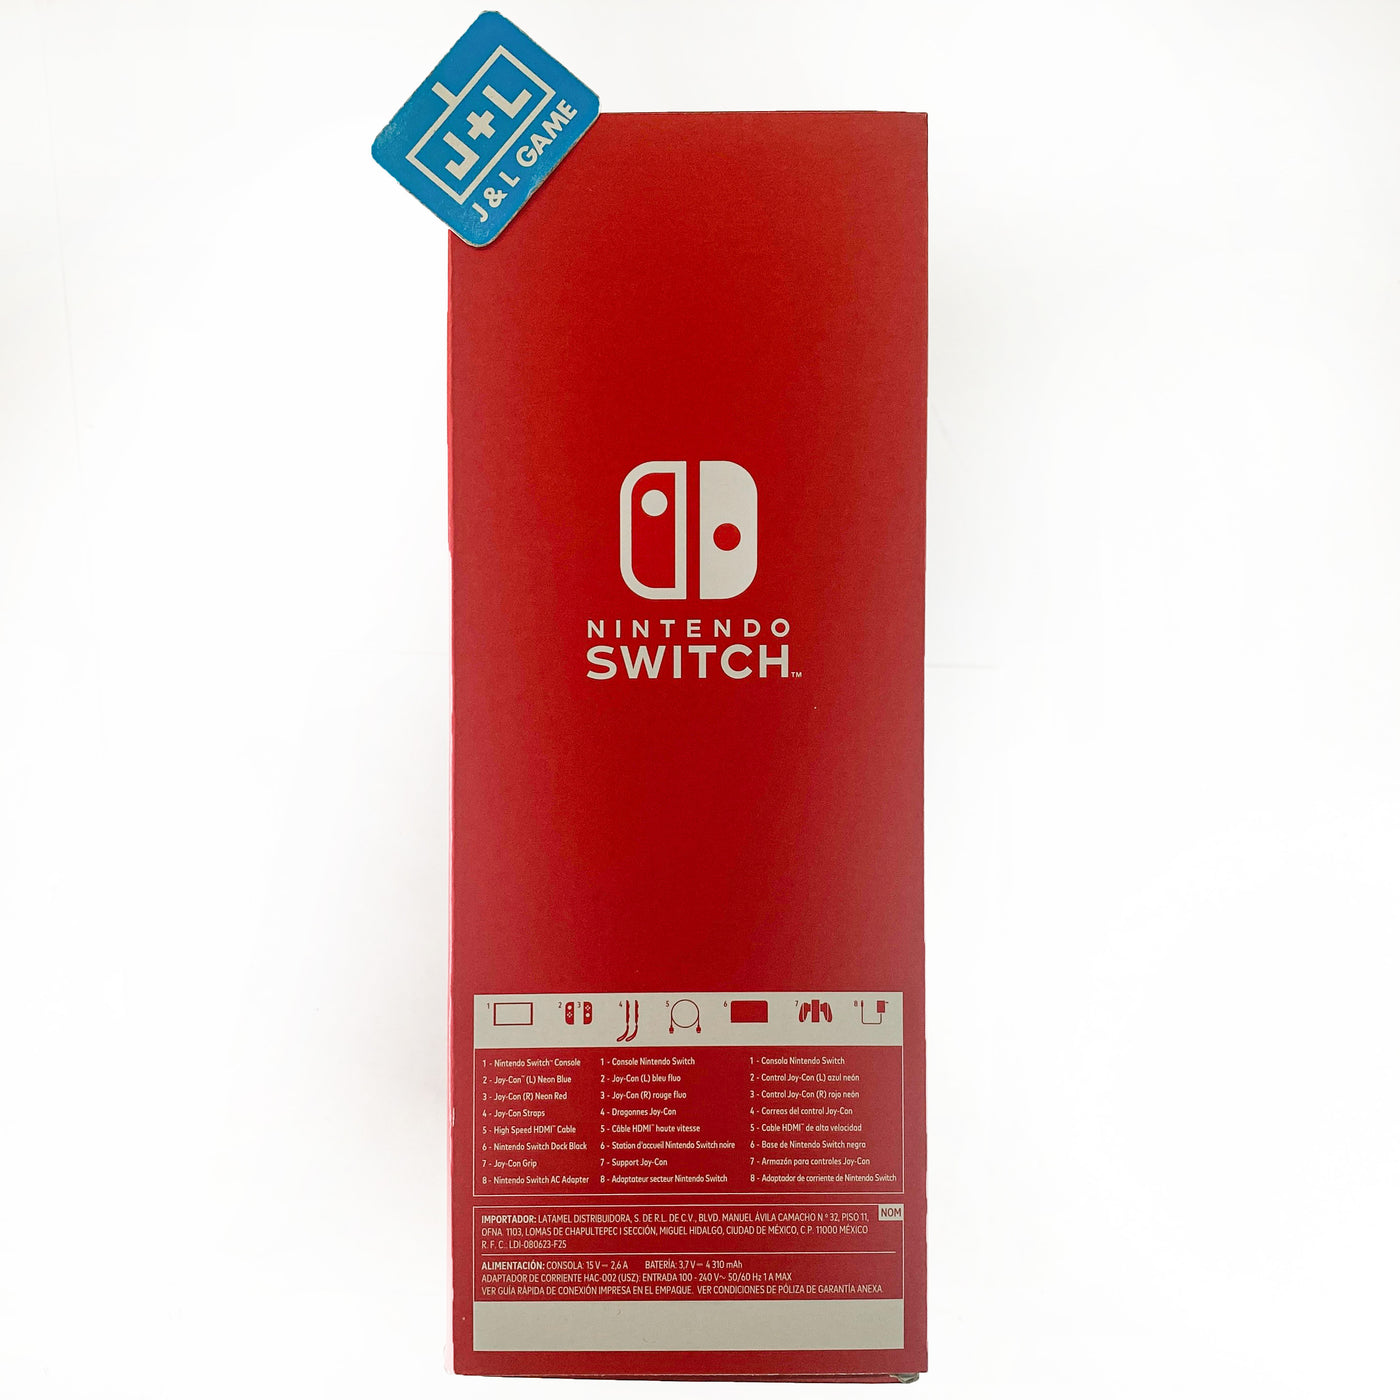 Nintendo Switch OLED Model 64 GB Neon Red & Neon Blue Japan New